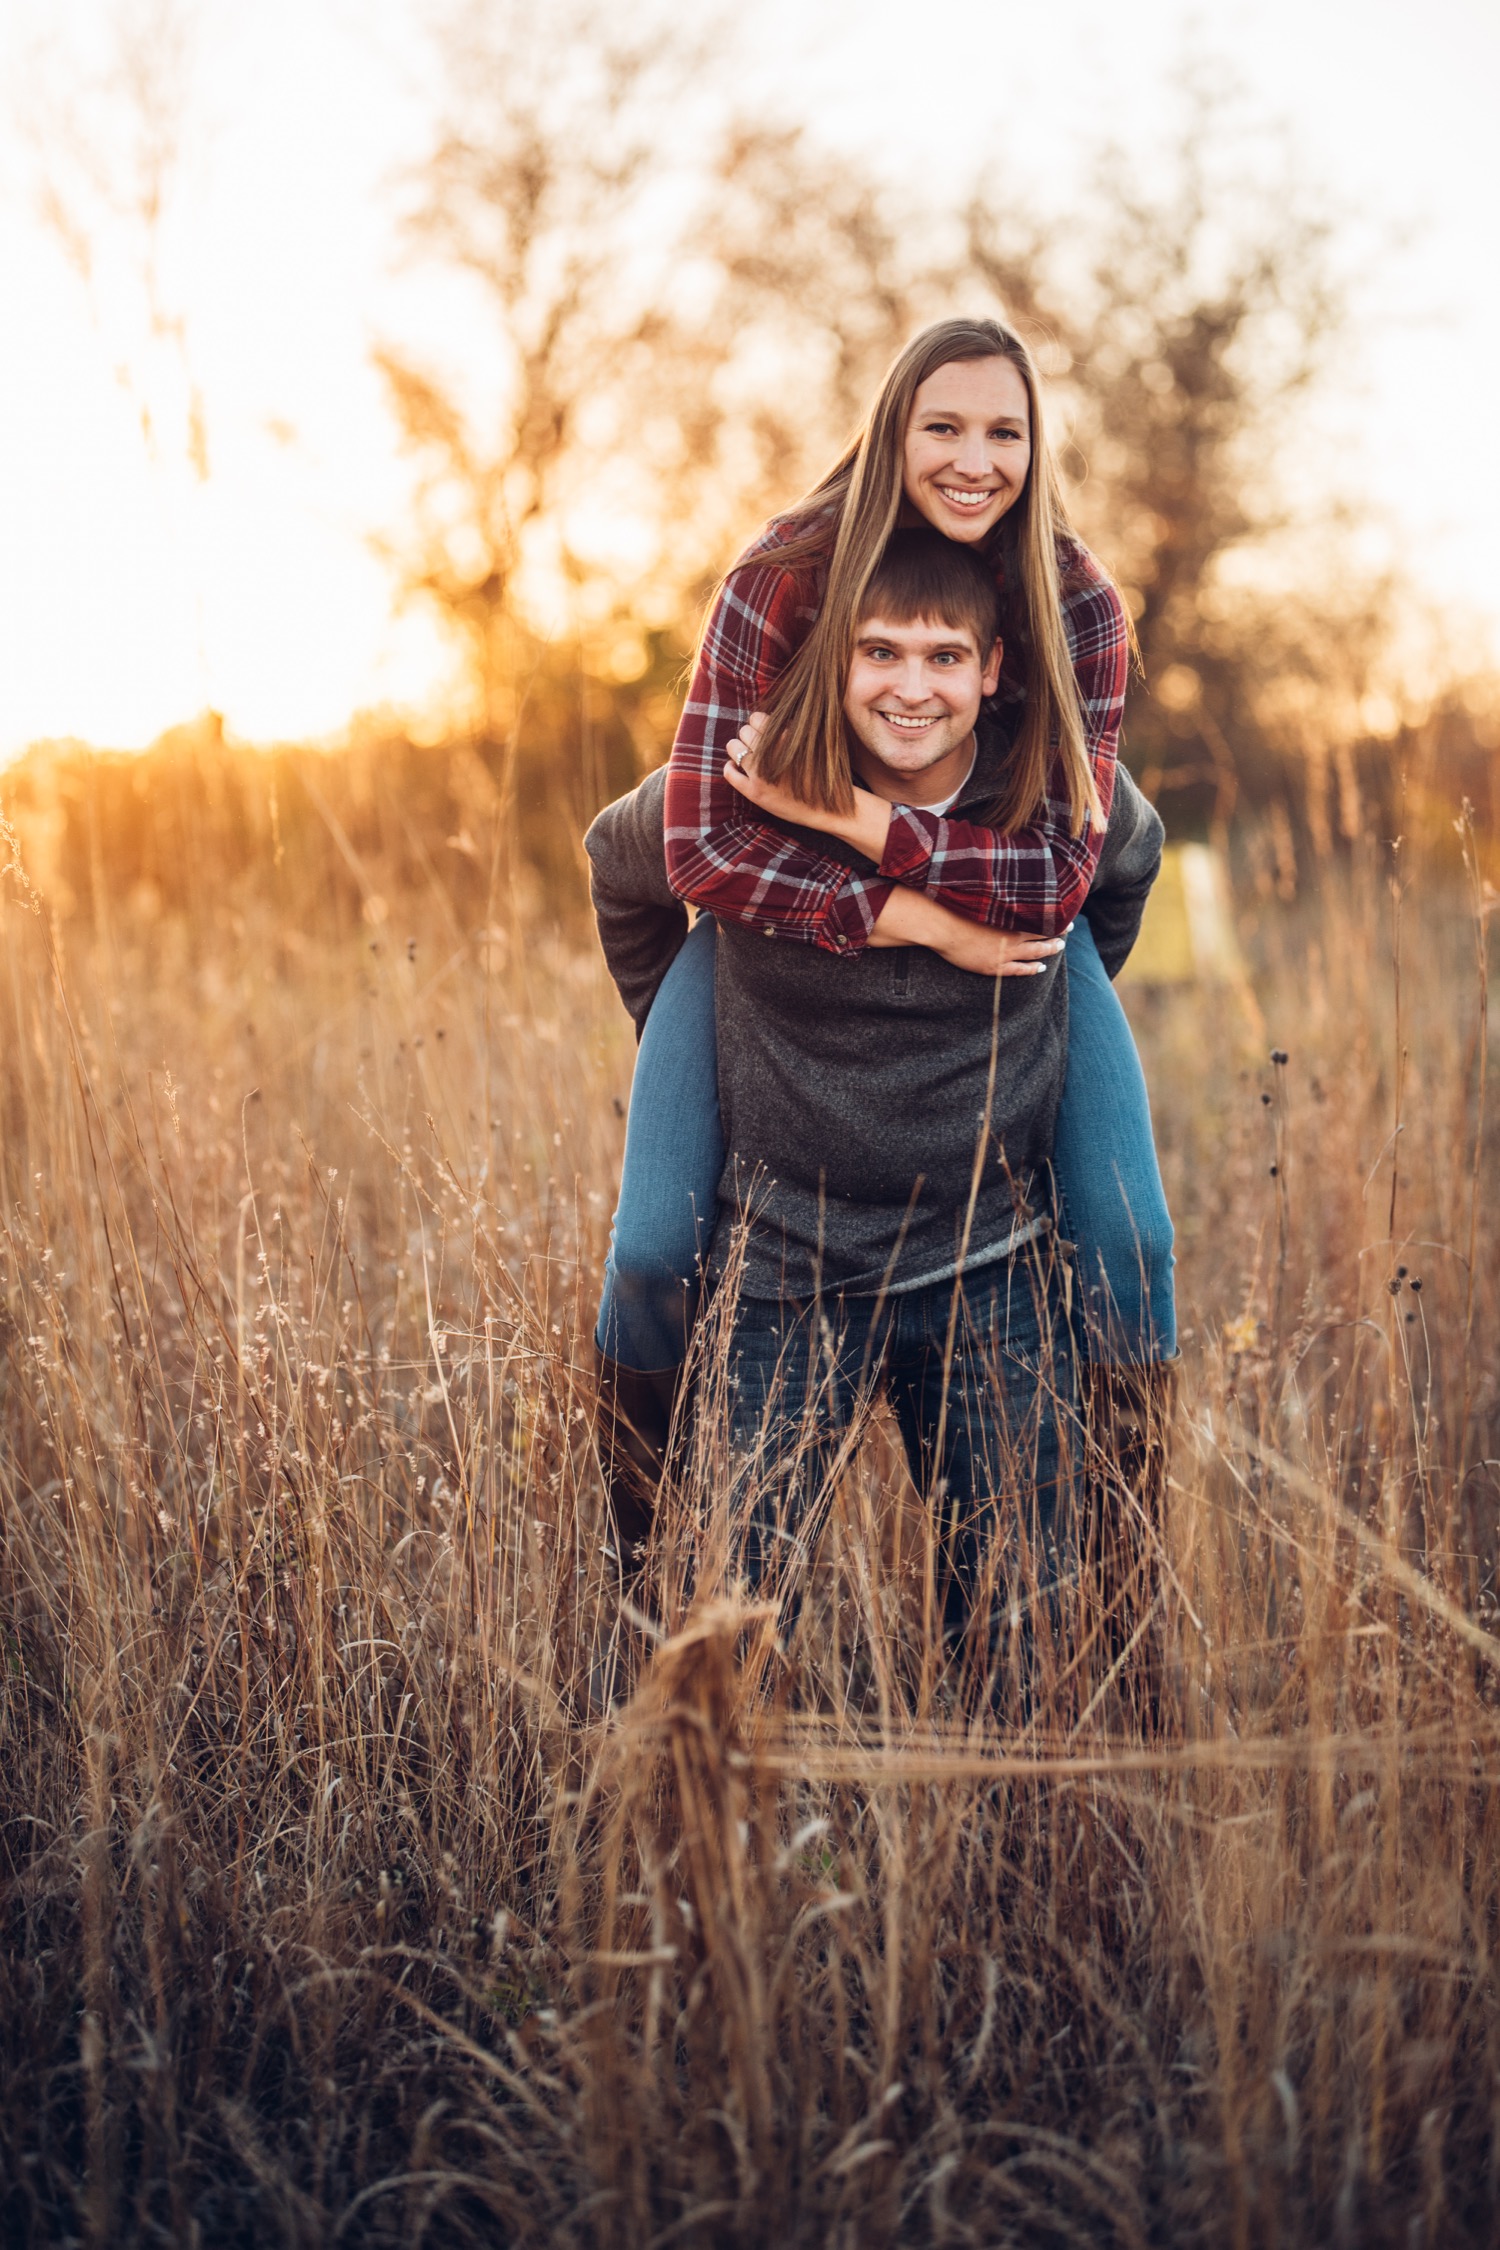 Central Minnesota engagement session filled with light